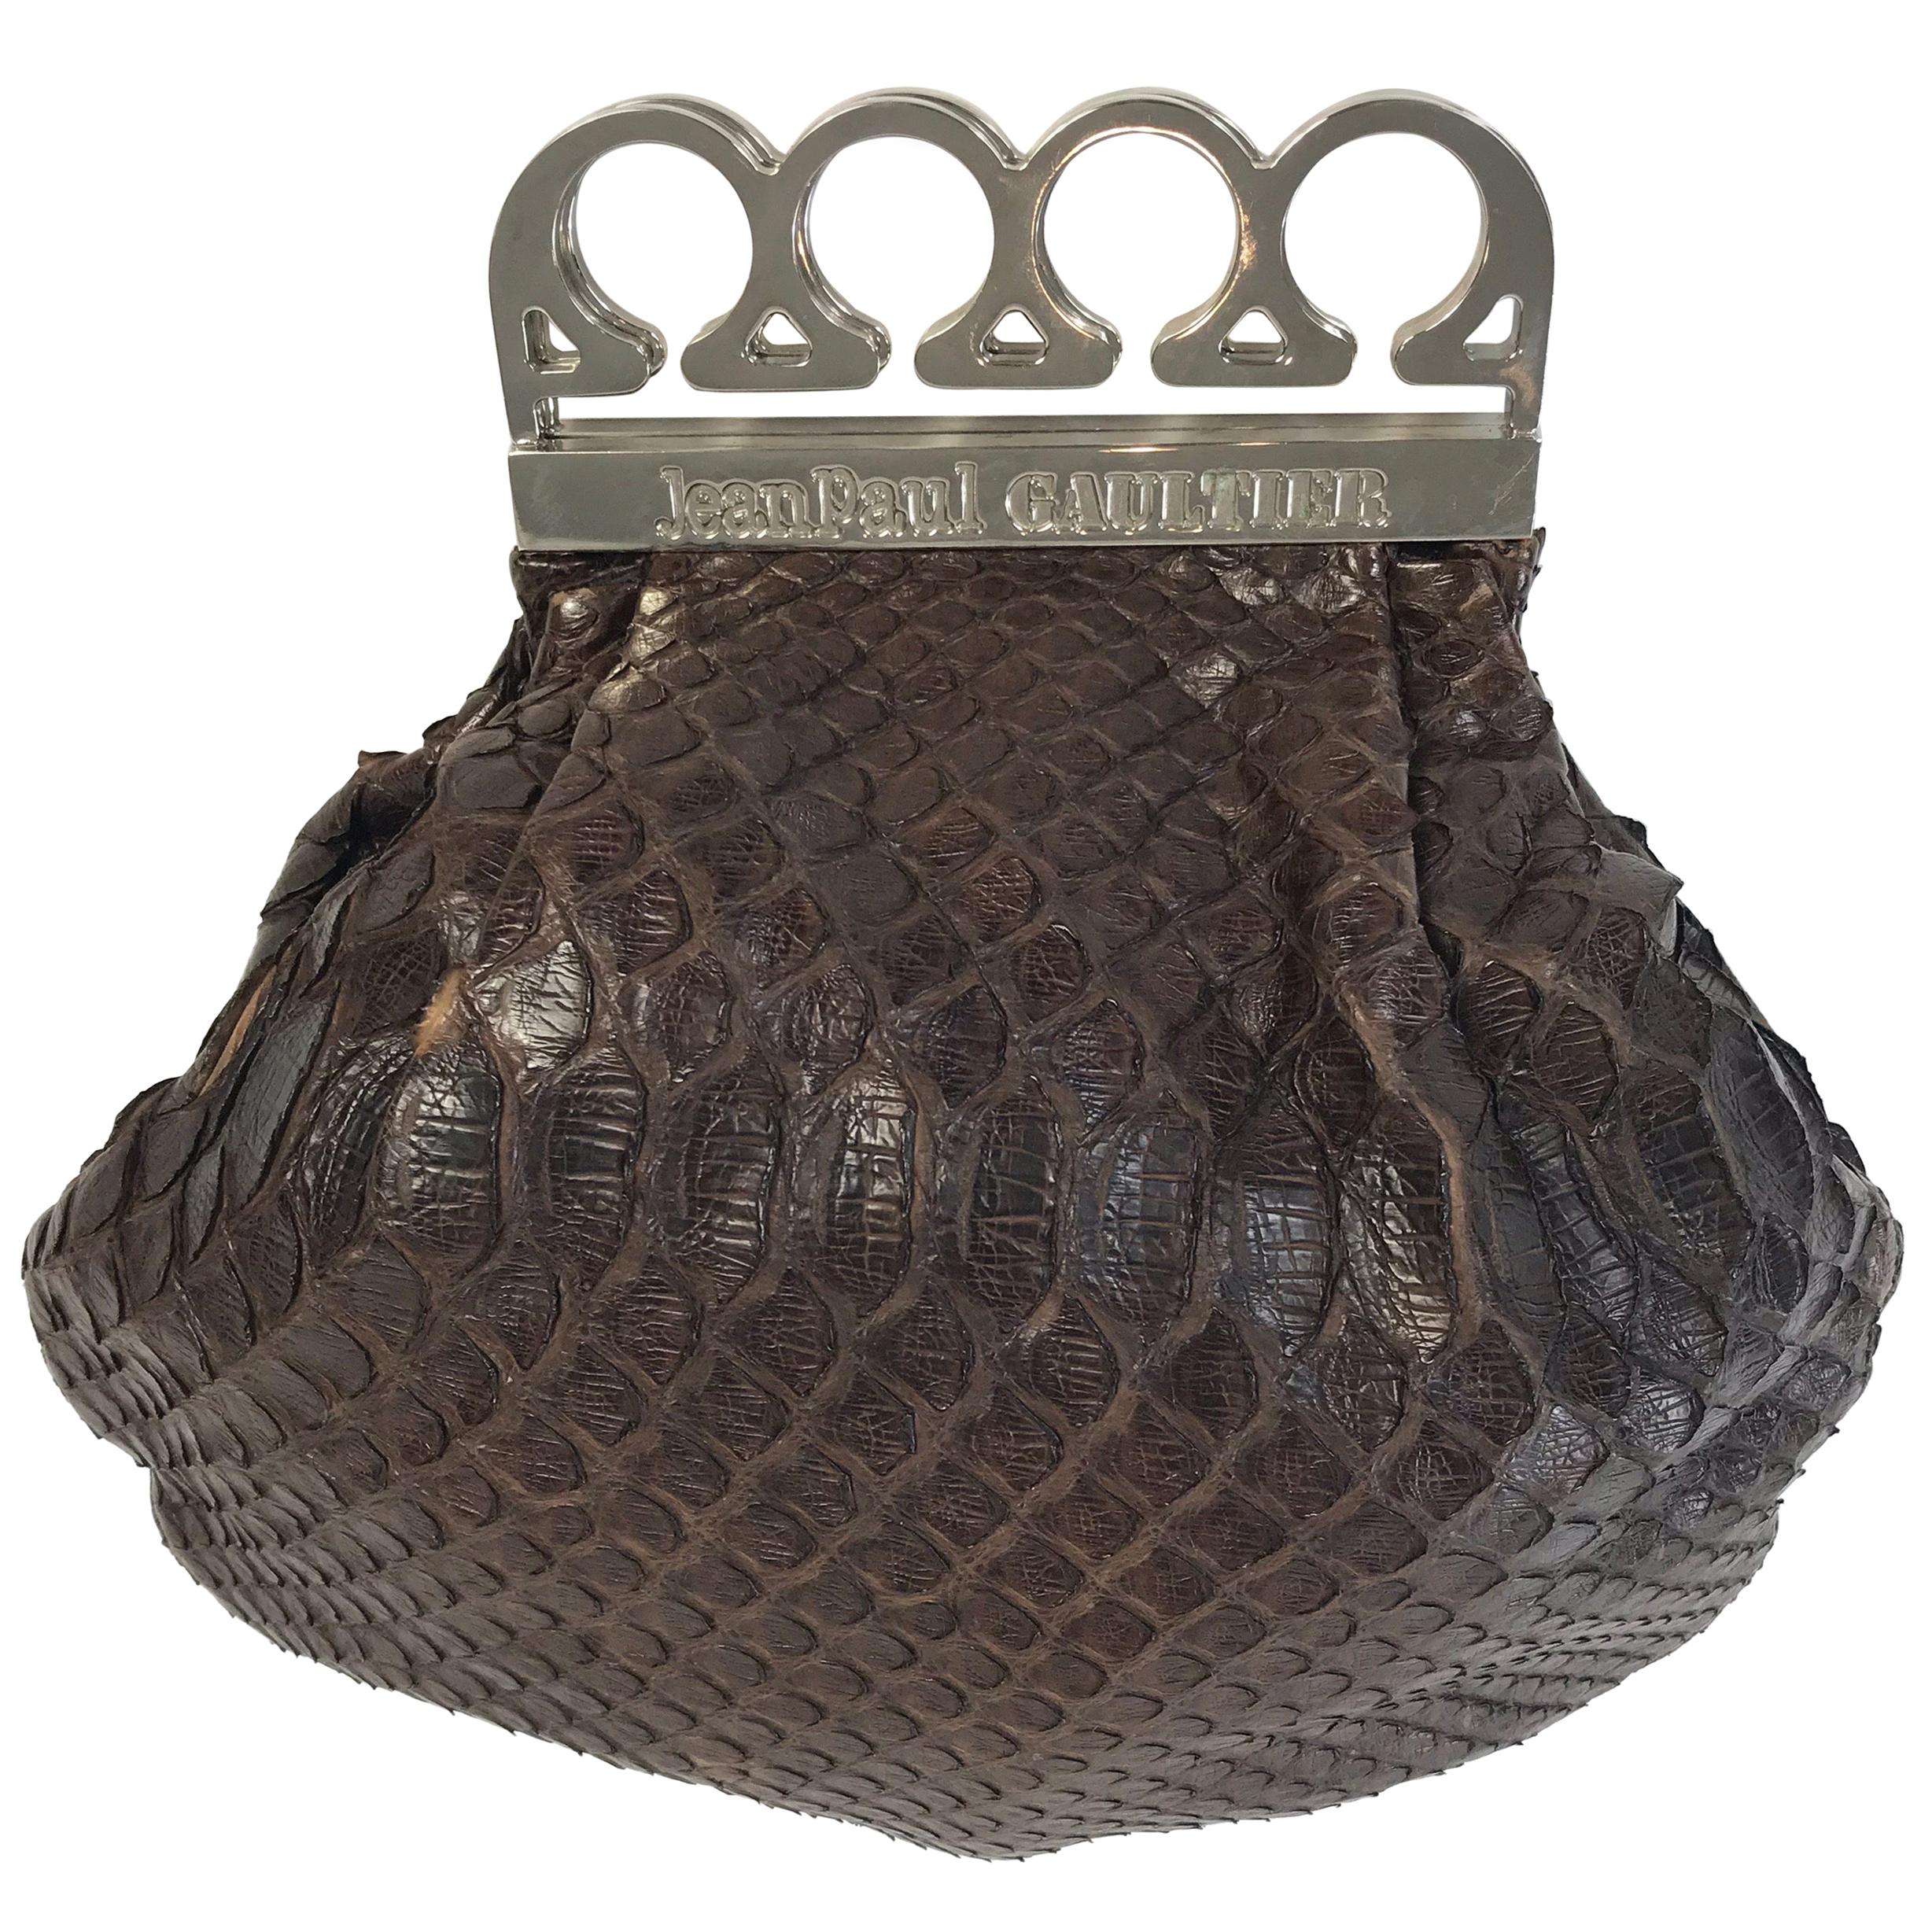 Vintage Jean Paul Gaultier Handbags and Purses - 14 For Sale at